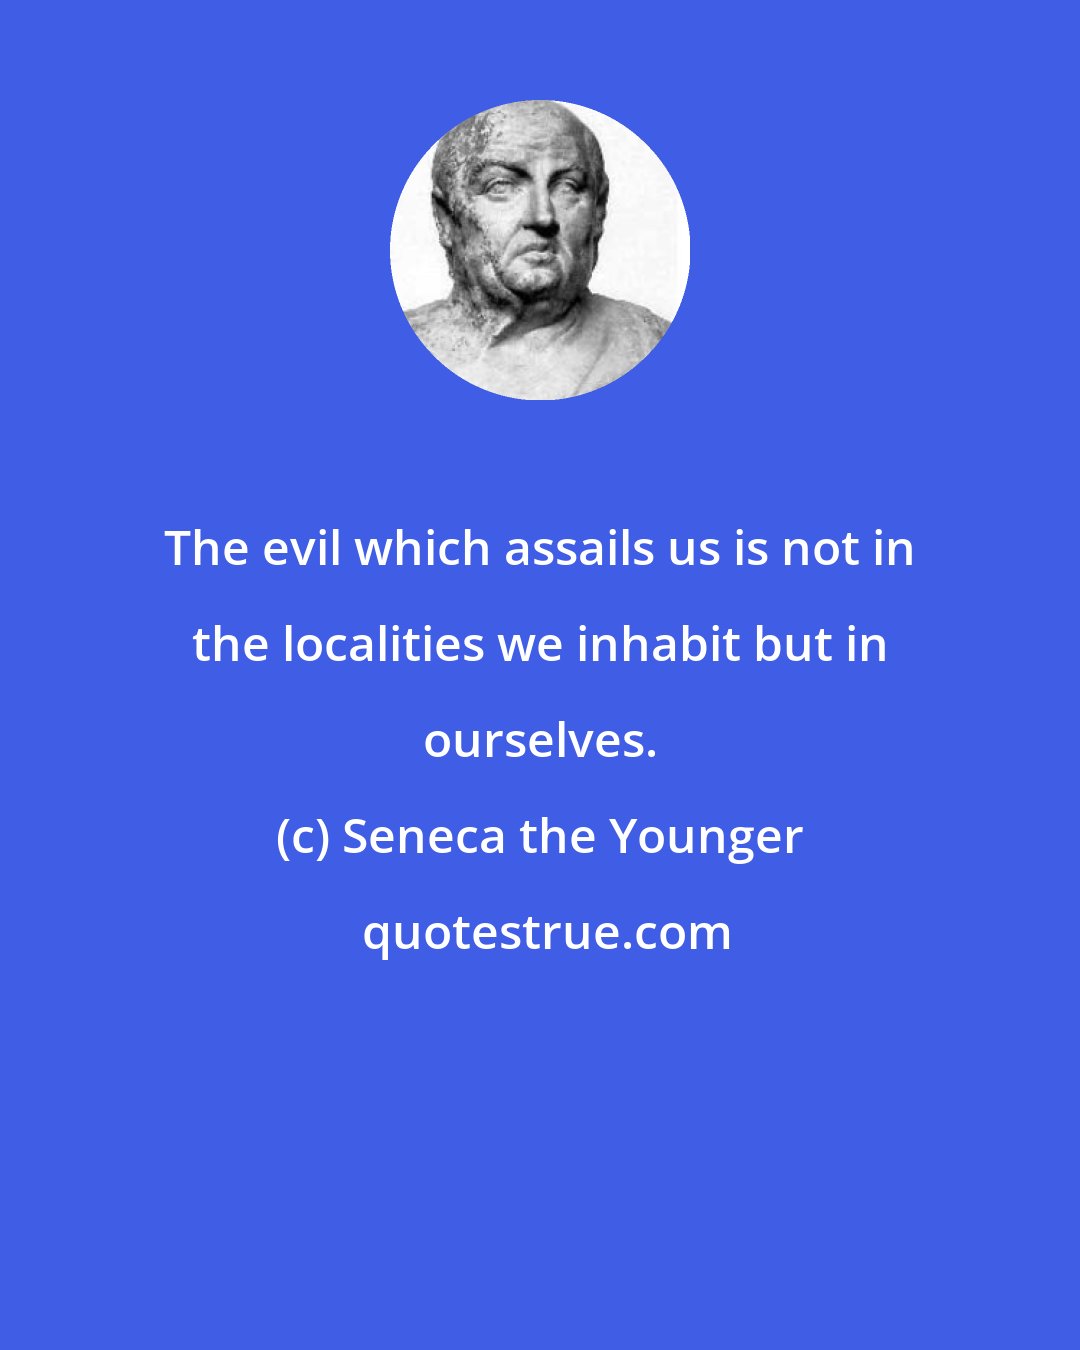 Seneca the Younger: The evil which assails us is not in the localities we inhabit but in ourselves.